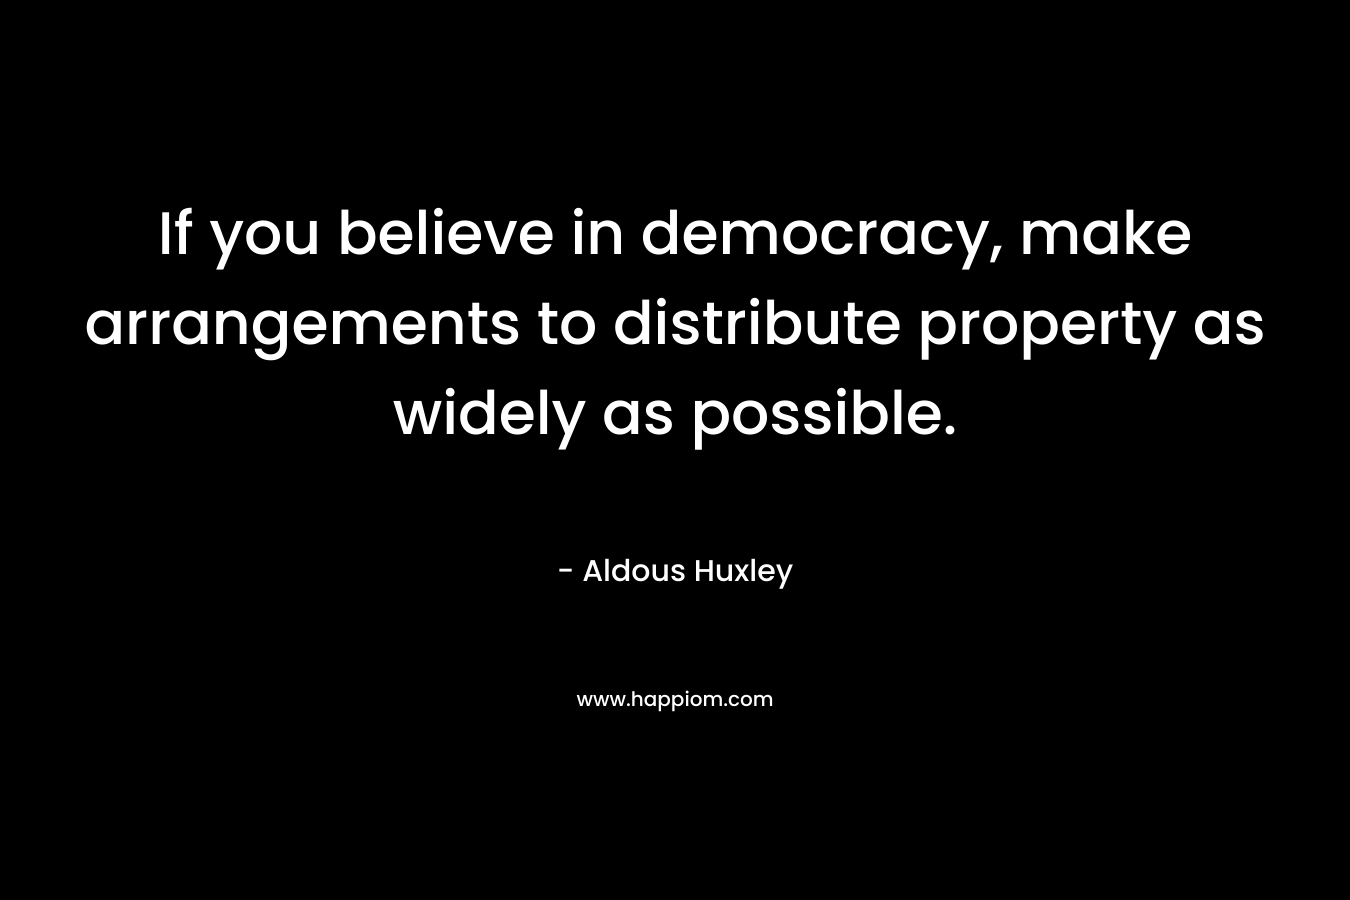 If you believe in democracy, make arrangements to distribute property as widely as possible.